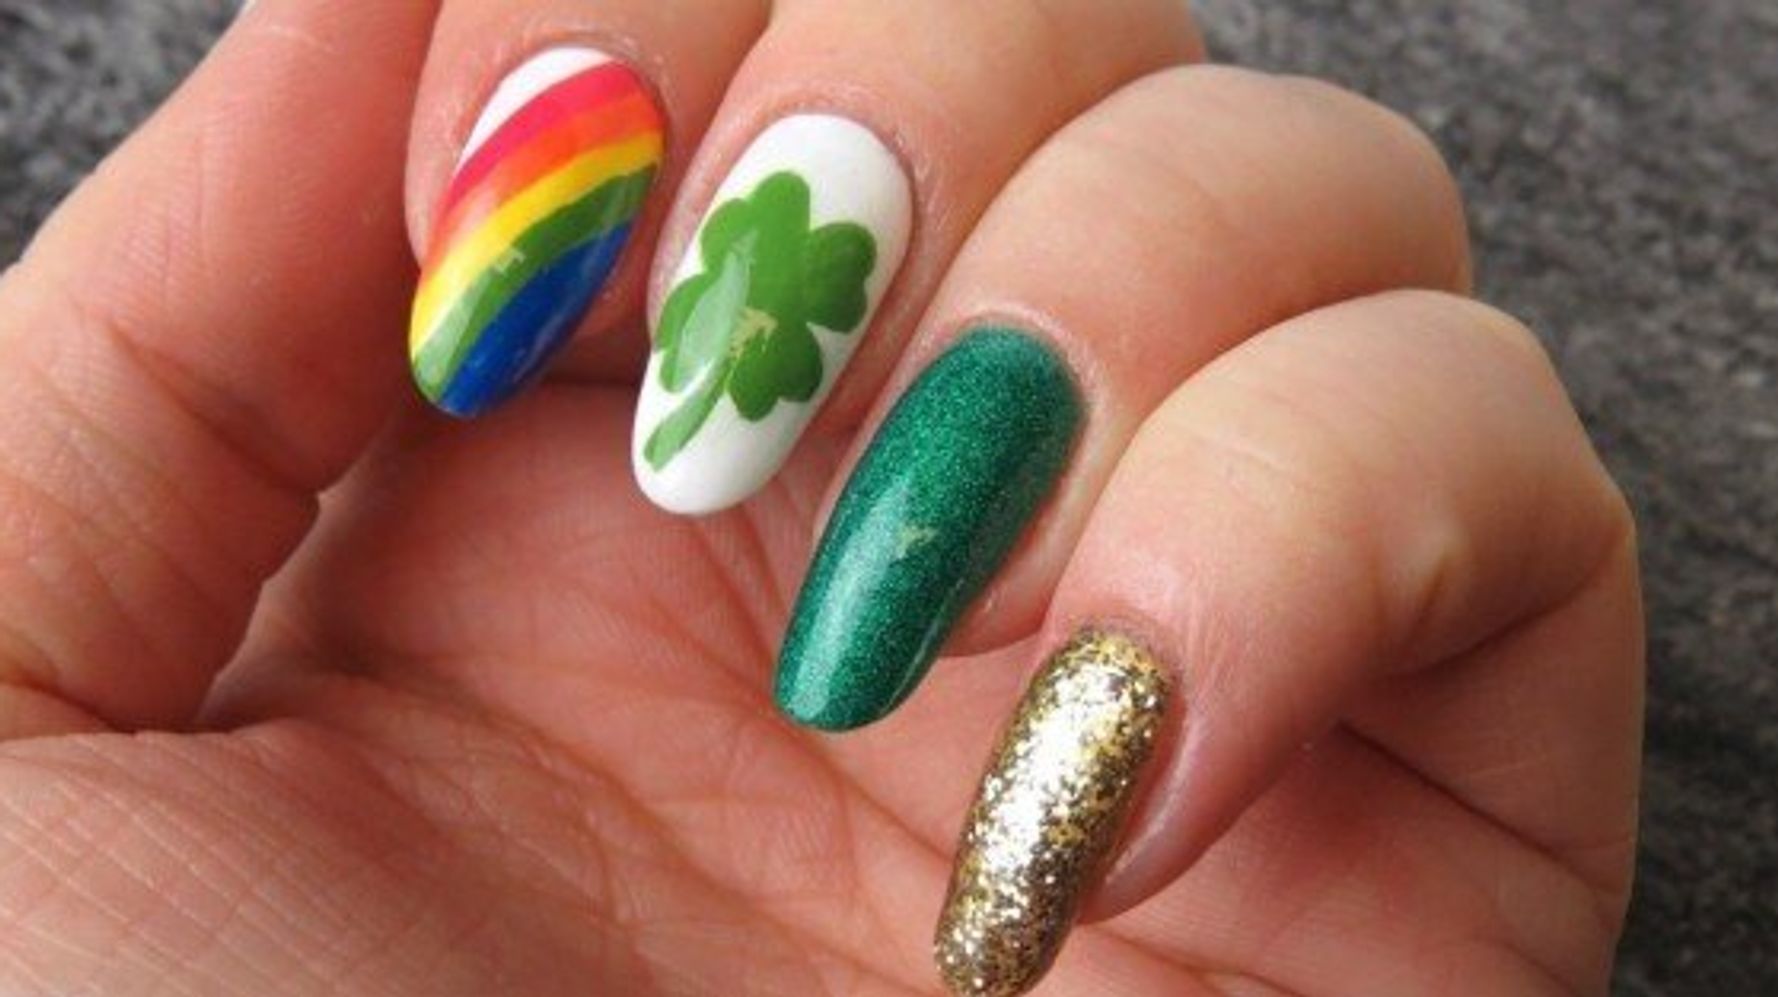 6. Celtic Knot Nail Art - wide 2